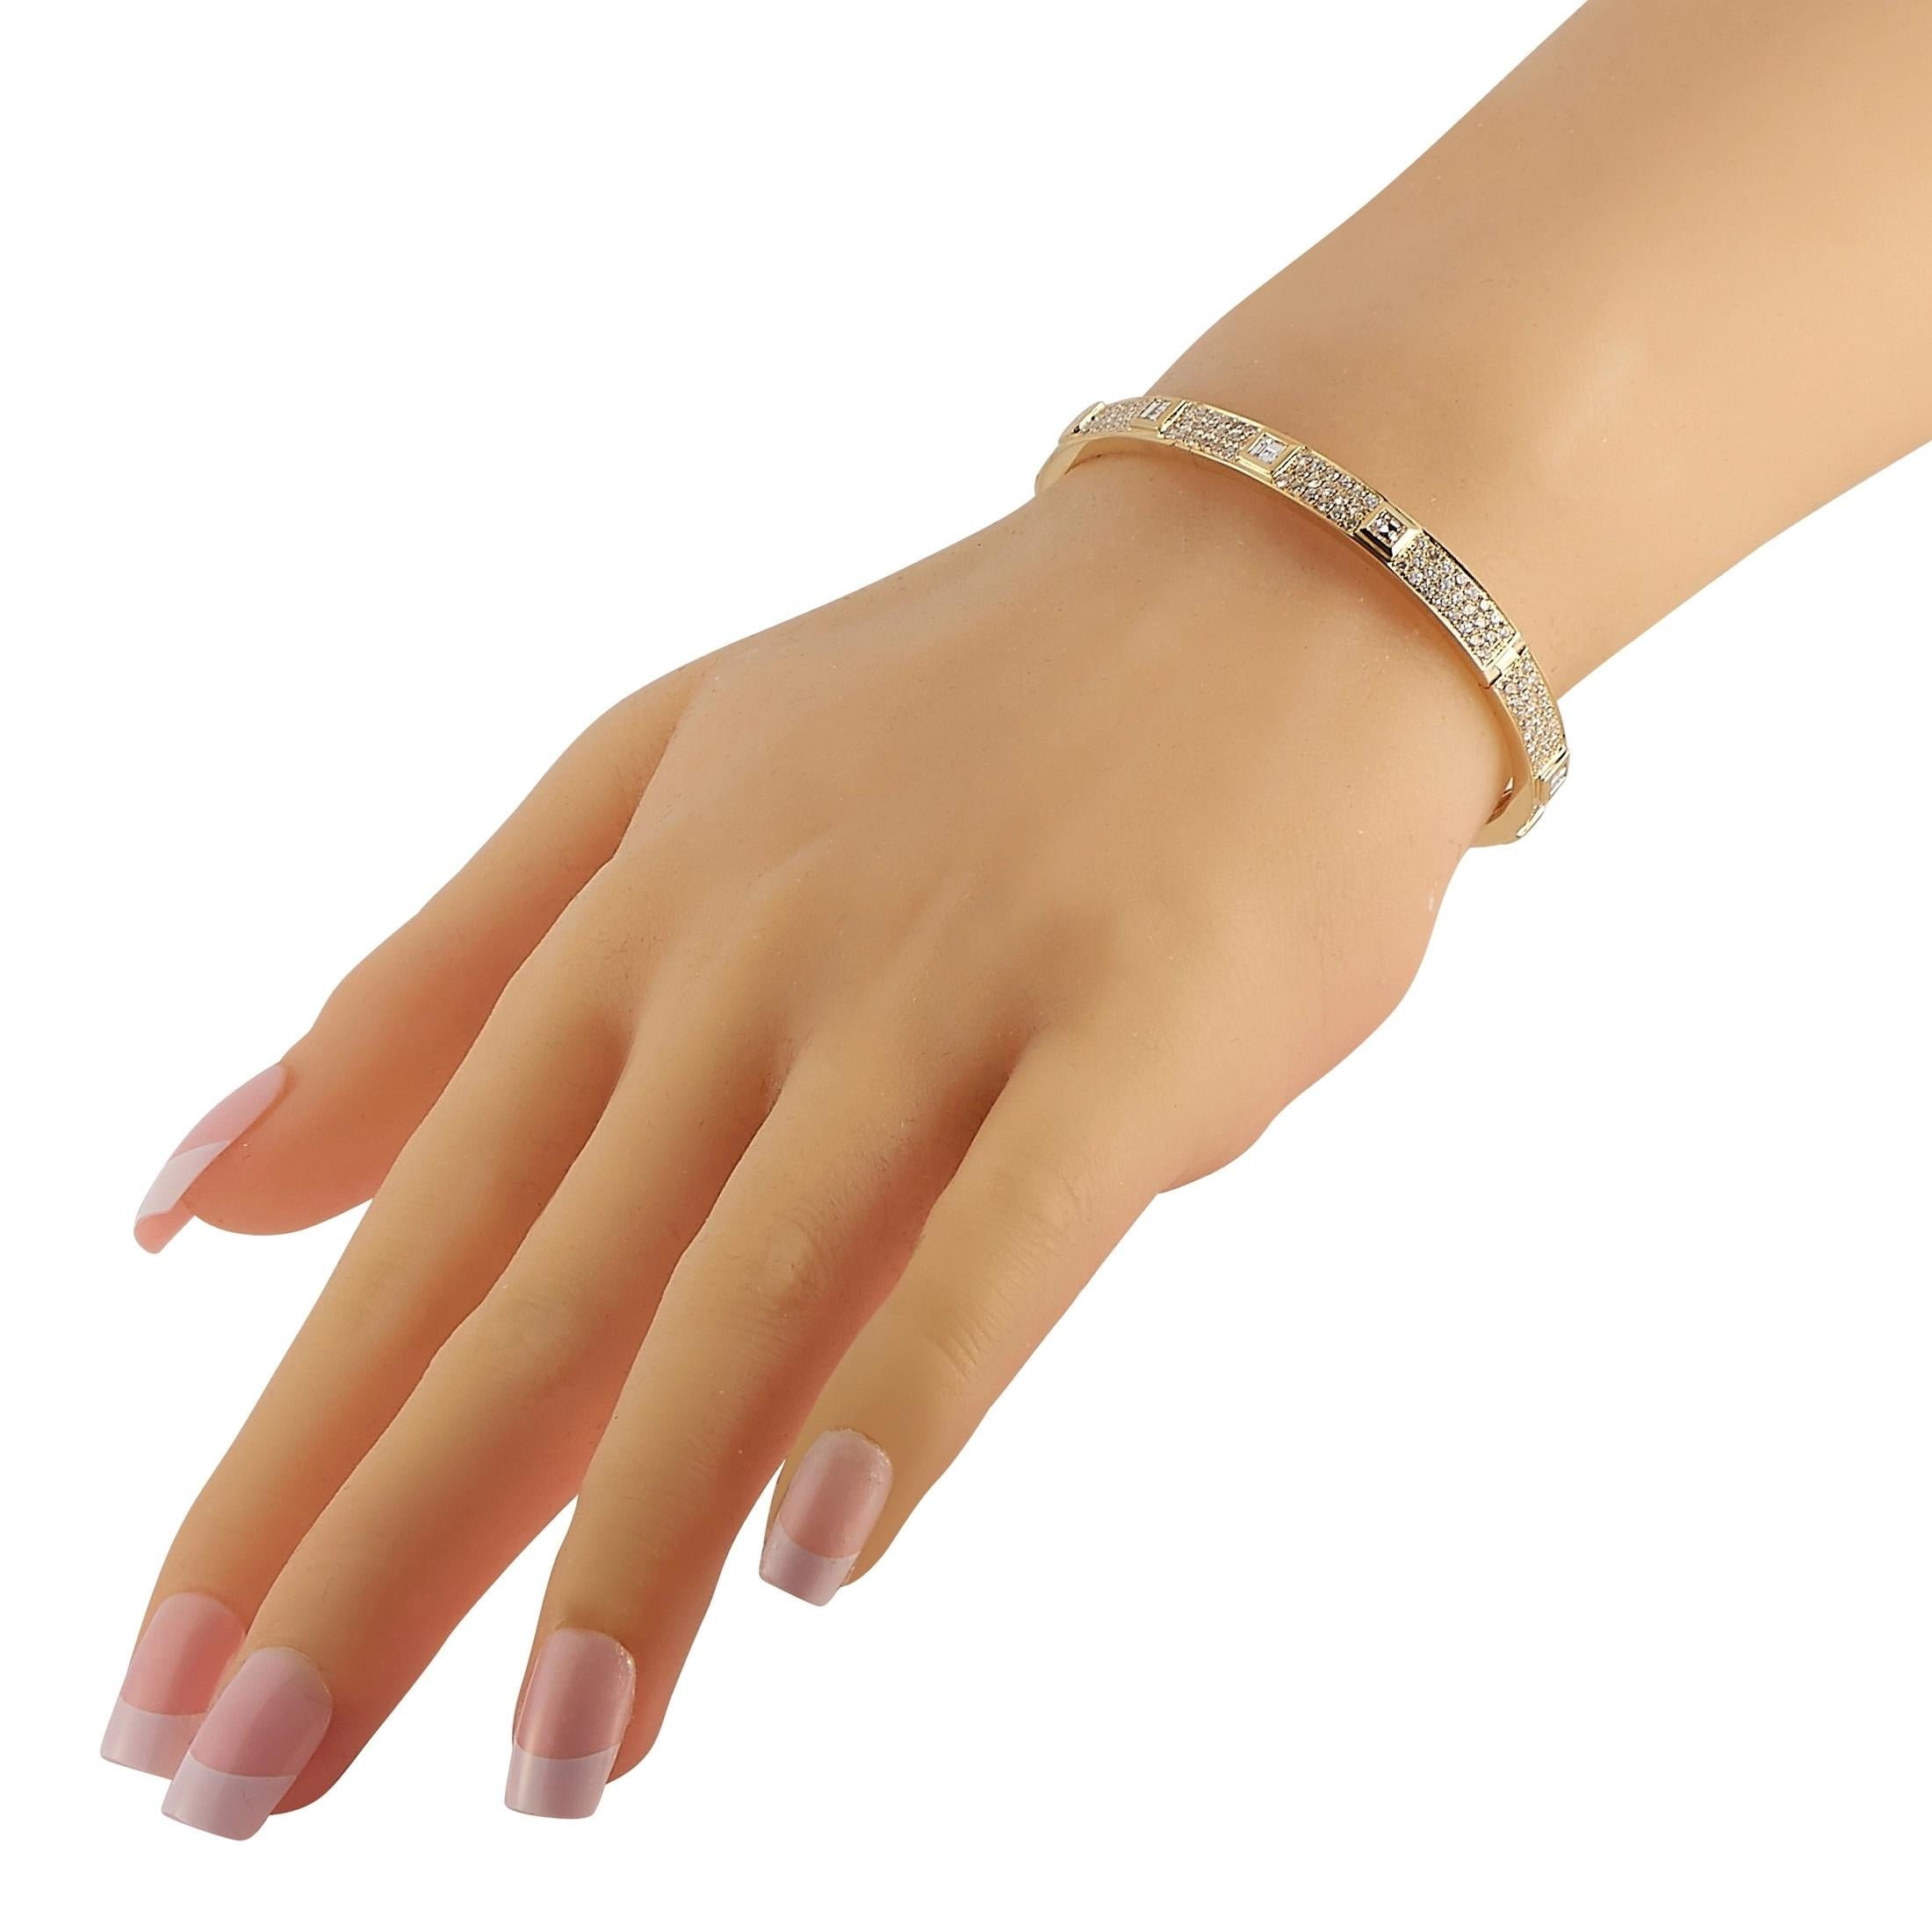  An opulent 18K Yellow Gold setting makes this bangle bracelet incredibly chic. Its stylish geometric design is only elevated by 2.78 carats of round-cut diamonds and Ascher-cut diamonds with a total weight of 1.87 carats. This classic piece